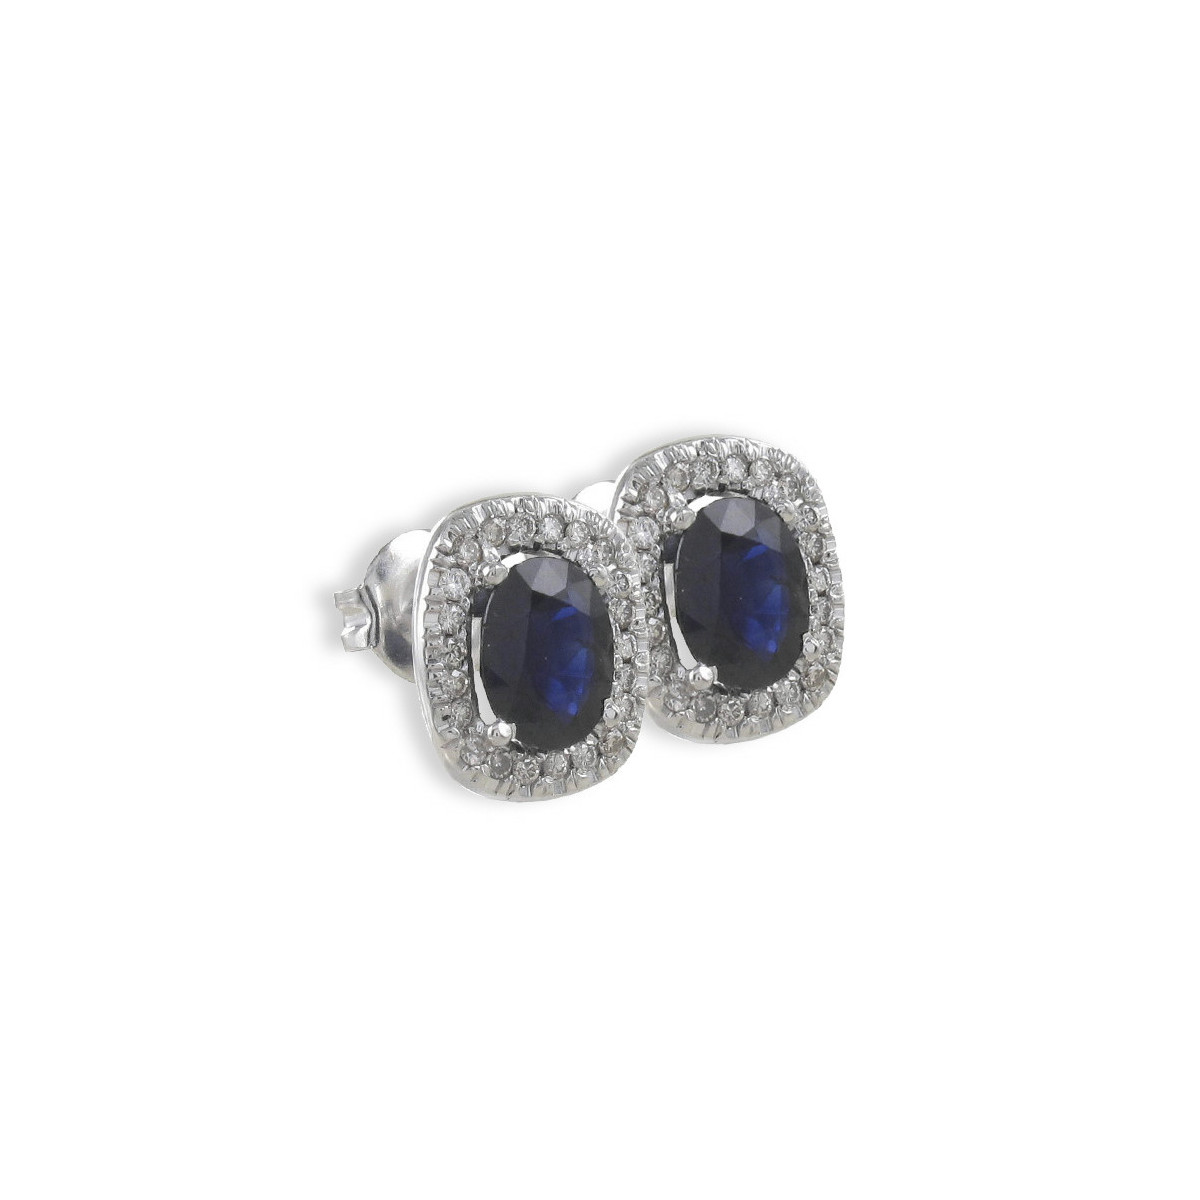 EARRINGS WITH 2 SAPPHIRES AND 44 DIAMONDS